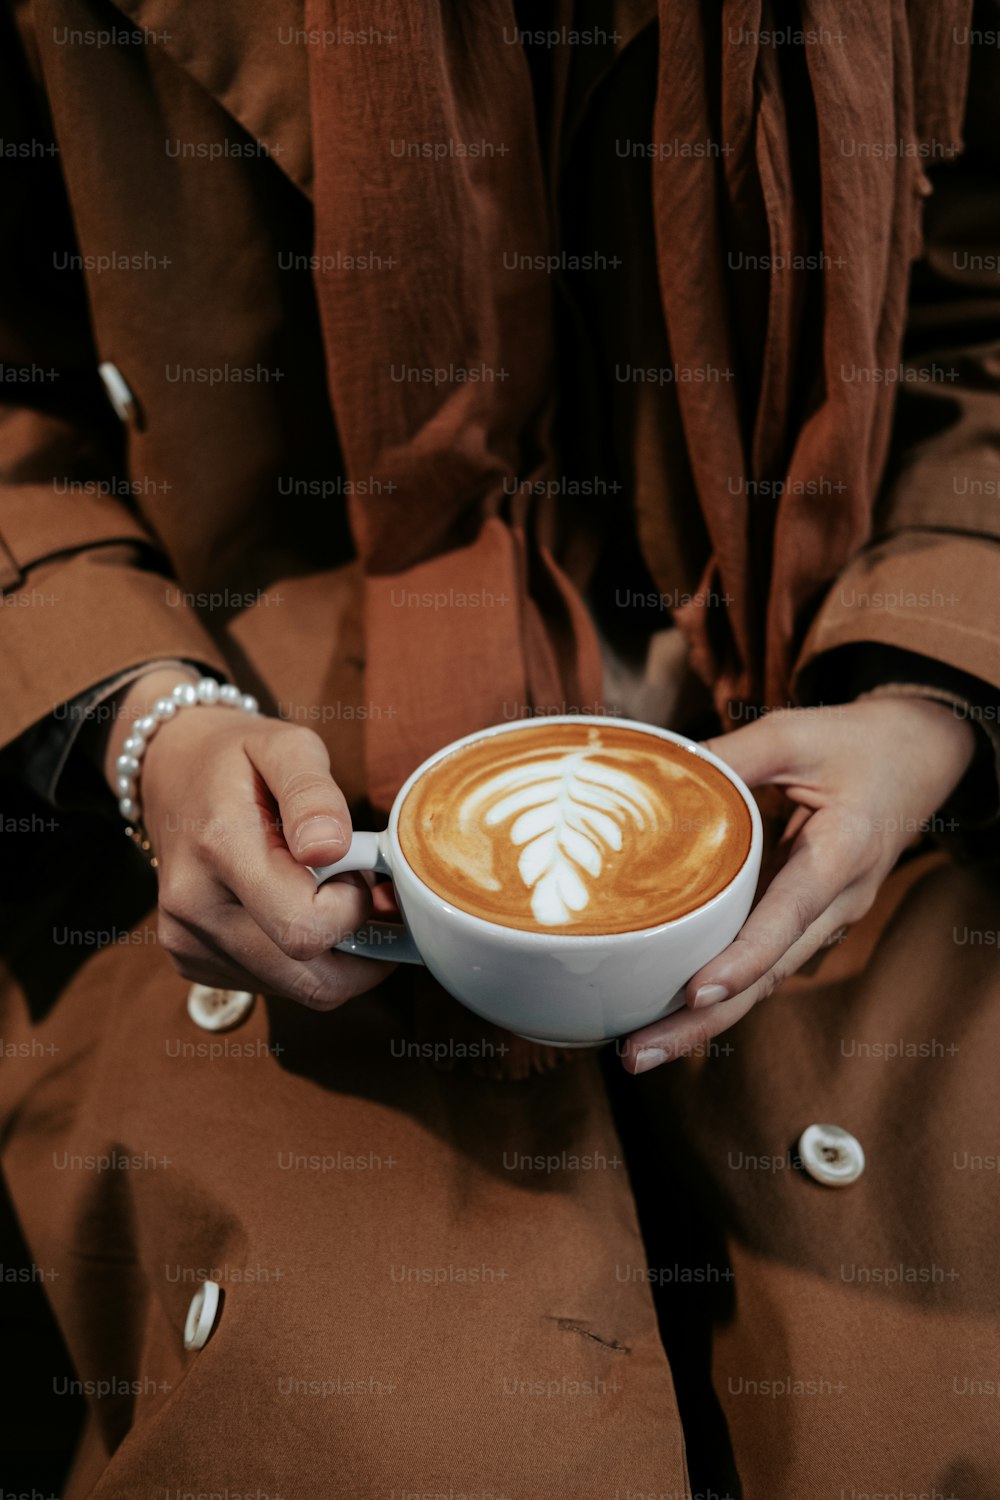 a person is holding a cup of coffee